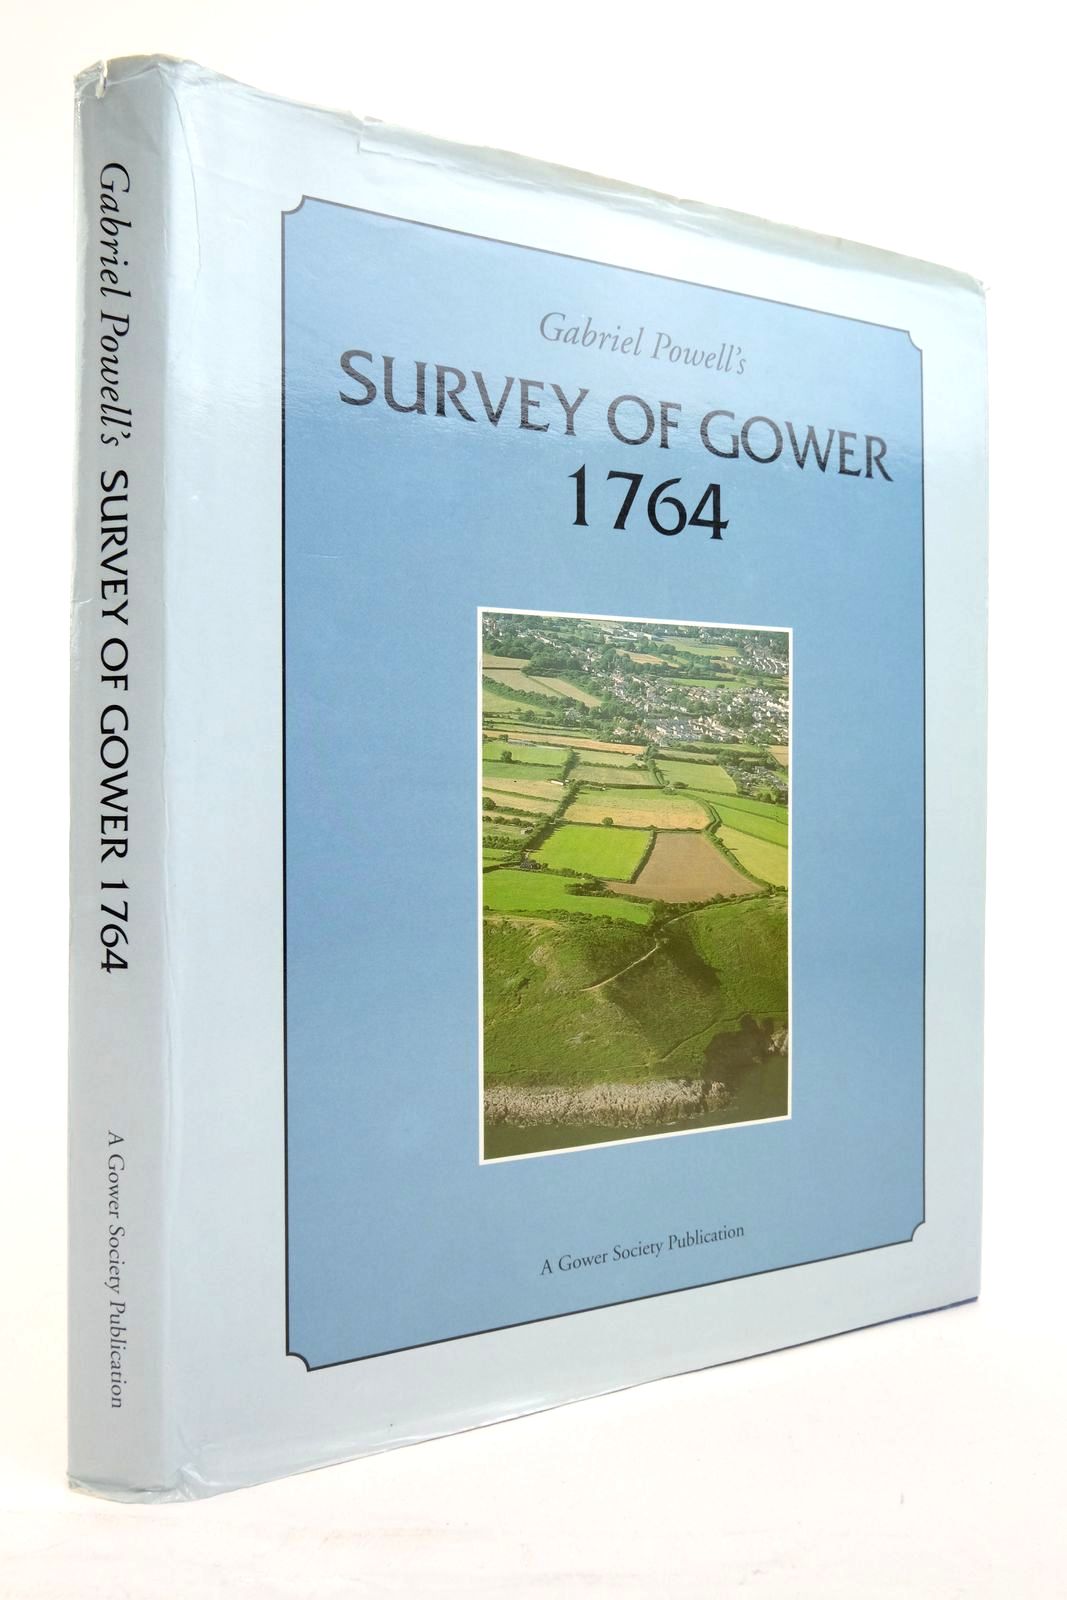 Photo of GABRIEL POWELL'S SURVEY OF THE LORDSHIP OF GOWER 1764- Stock Number: 2137890